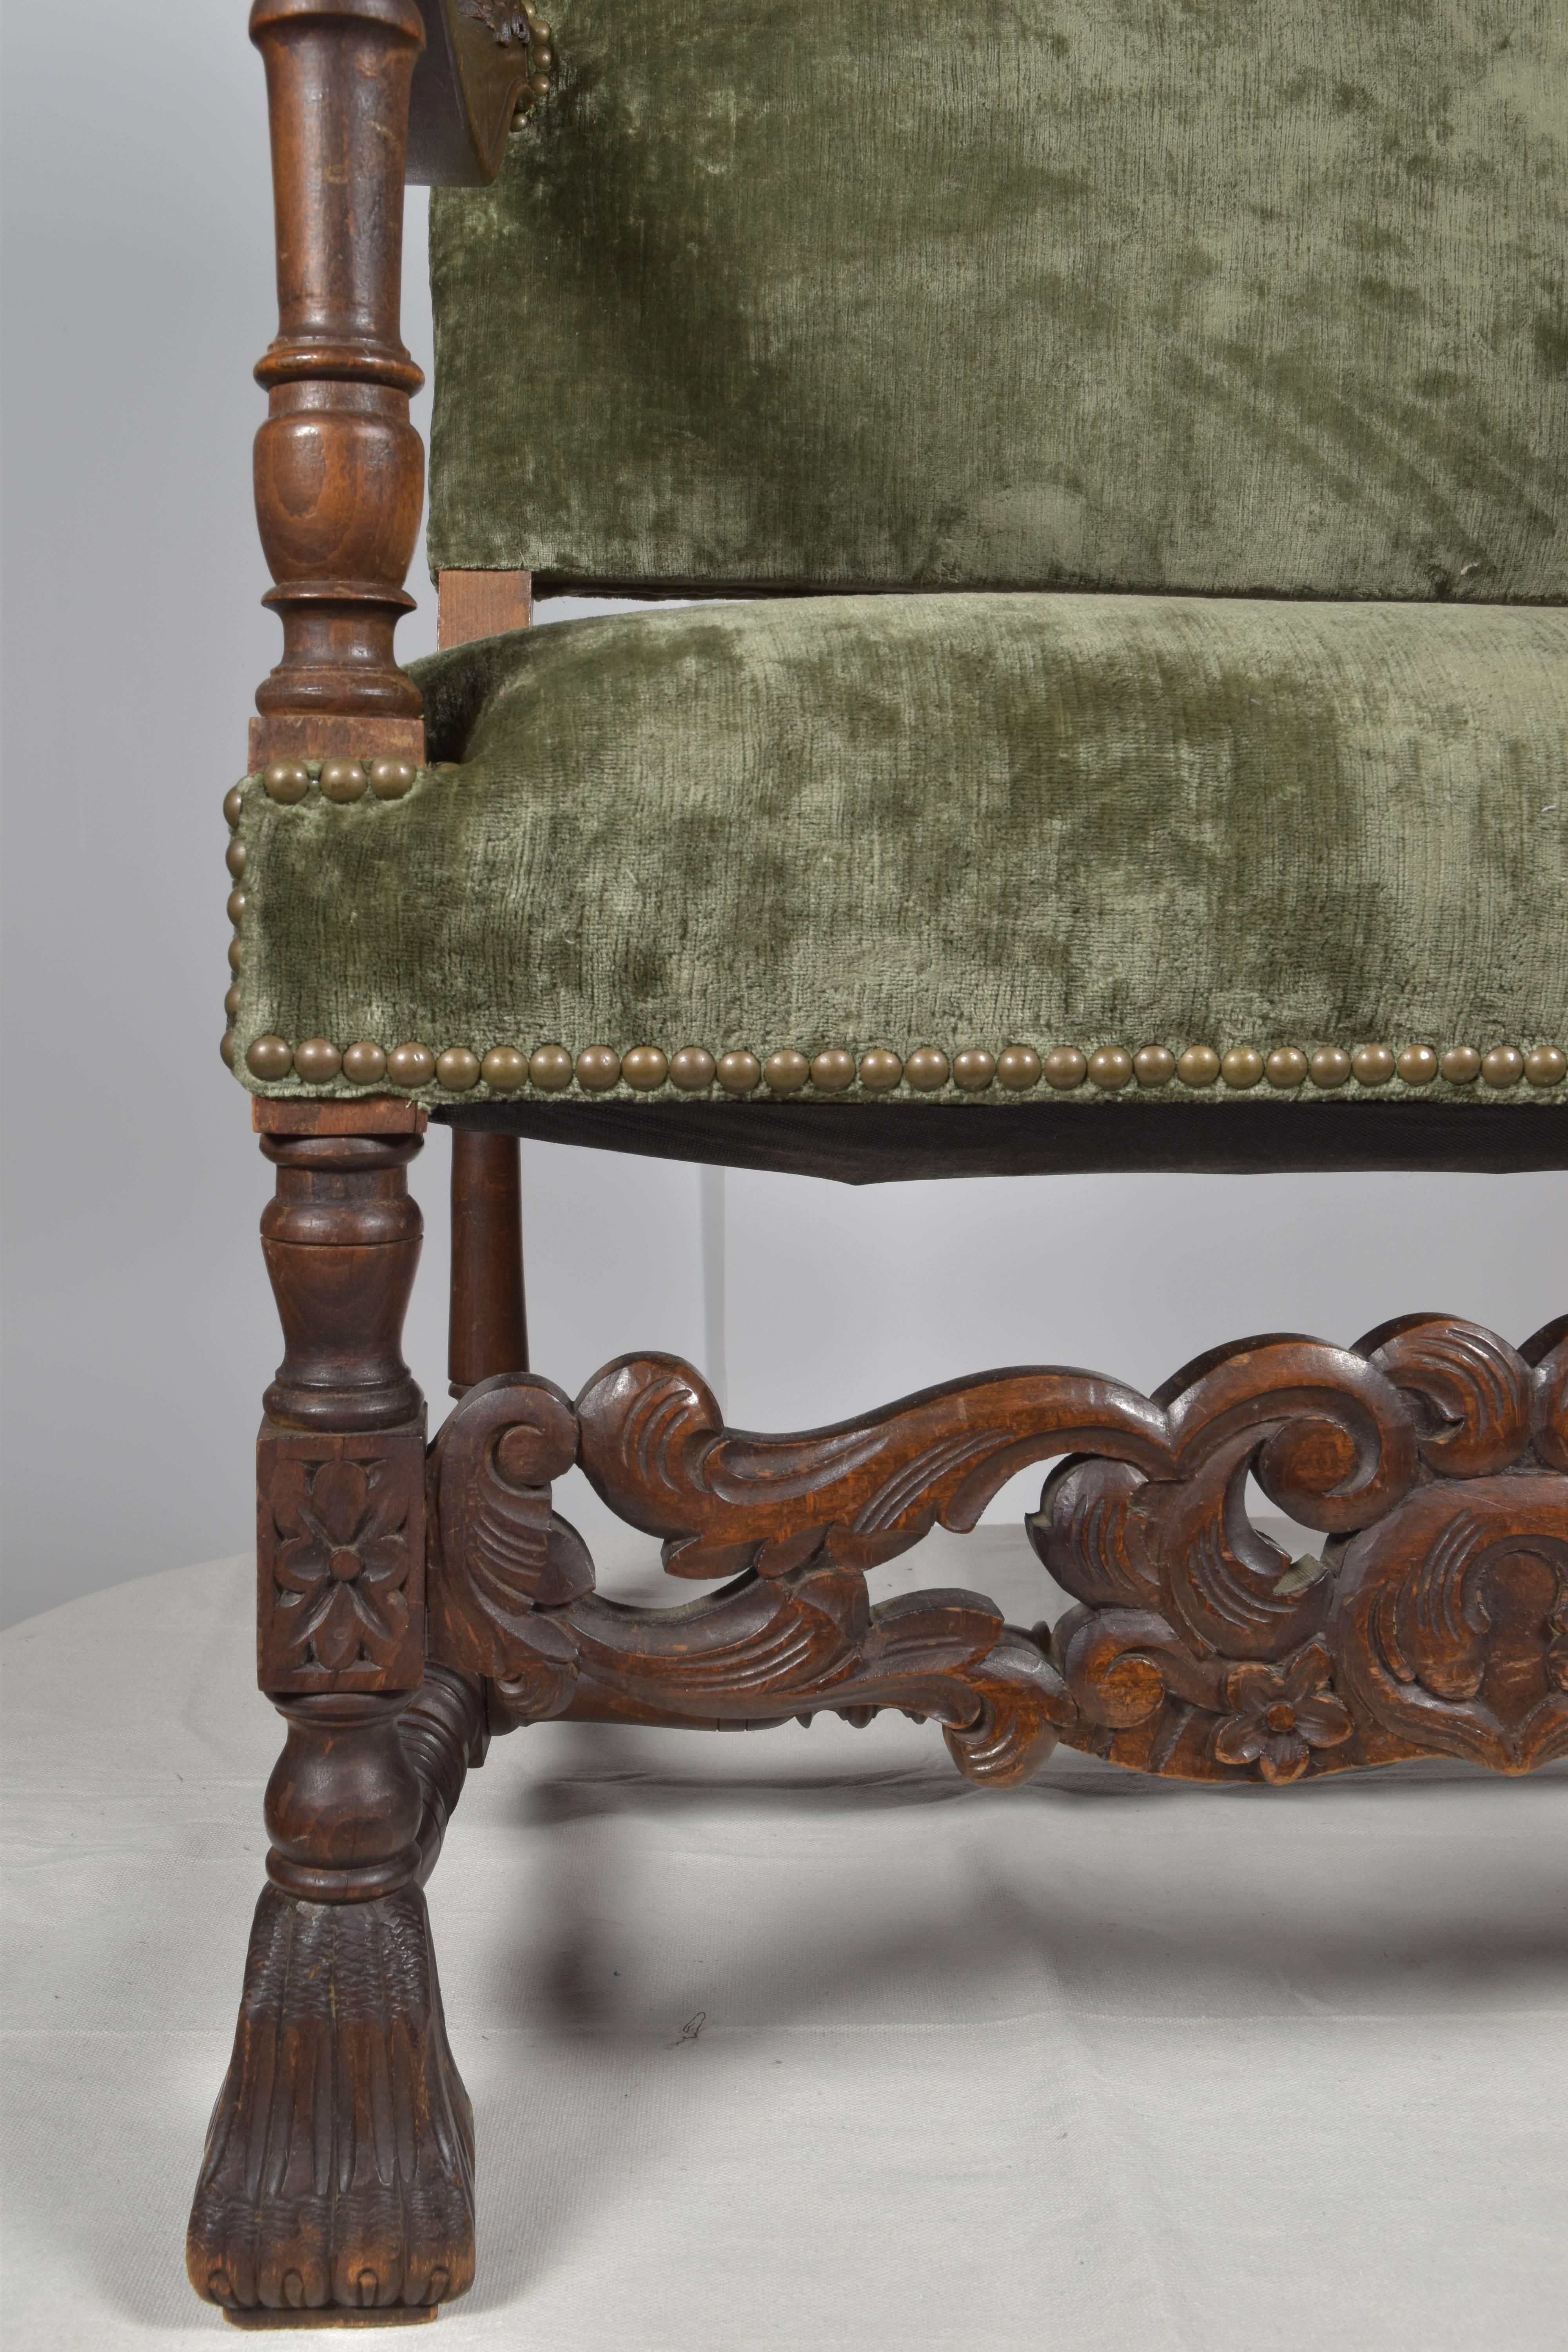 Handsome and large-scale, French armchair. Newly upholstered in green velvet with nailhead trim. Carved details on the armrests and stretcher.